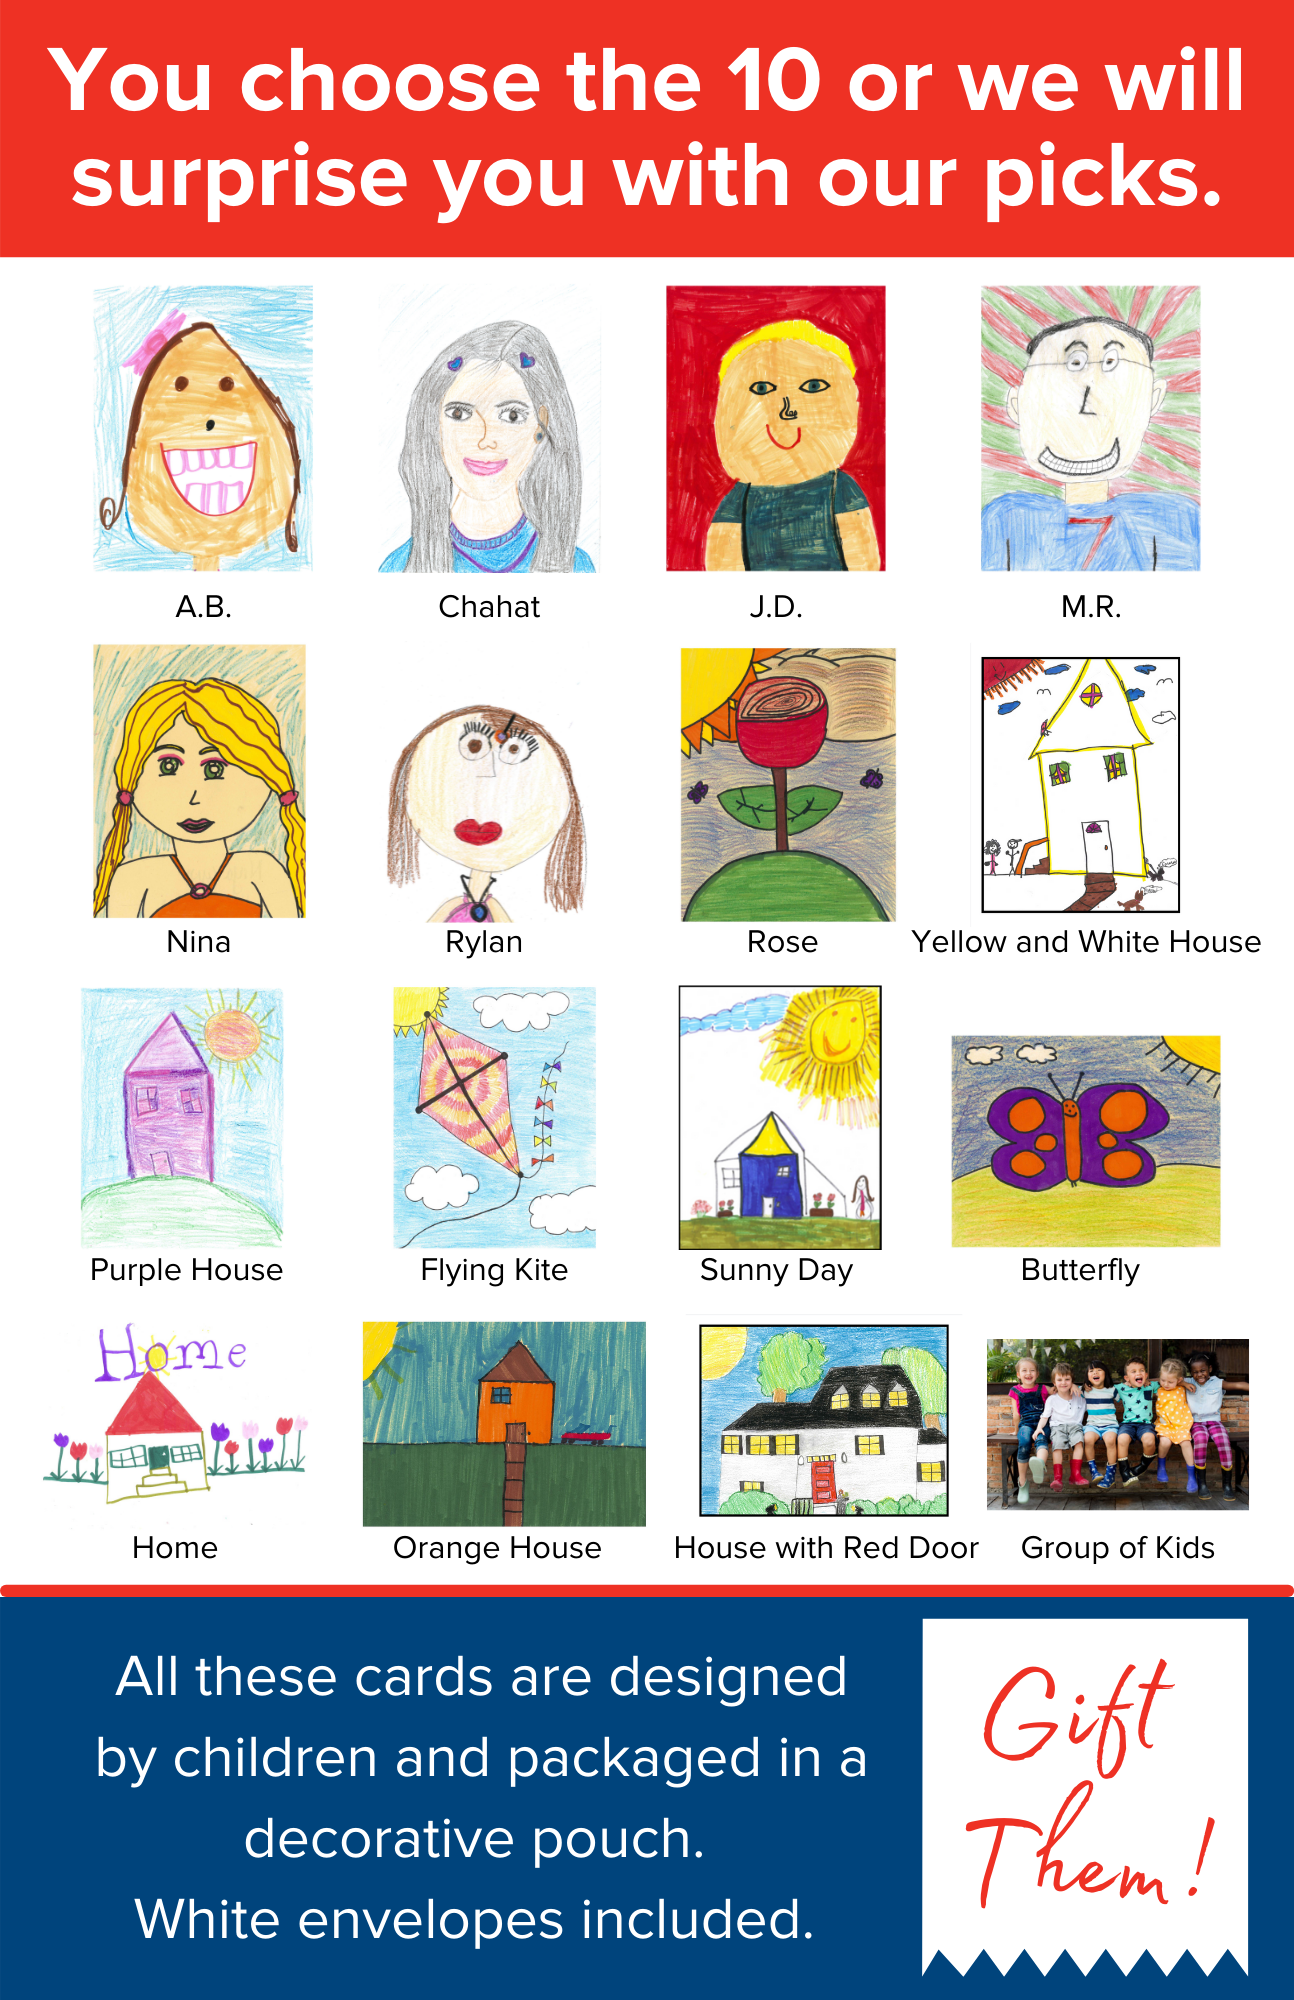 21-03: For Any Occasion - Original Children's Drawings